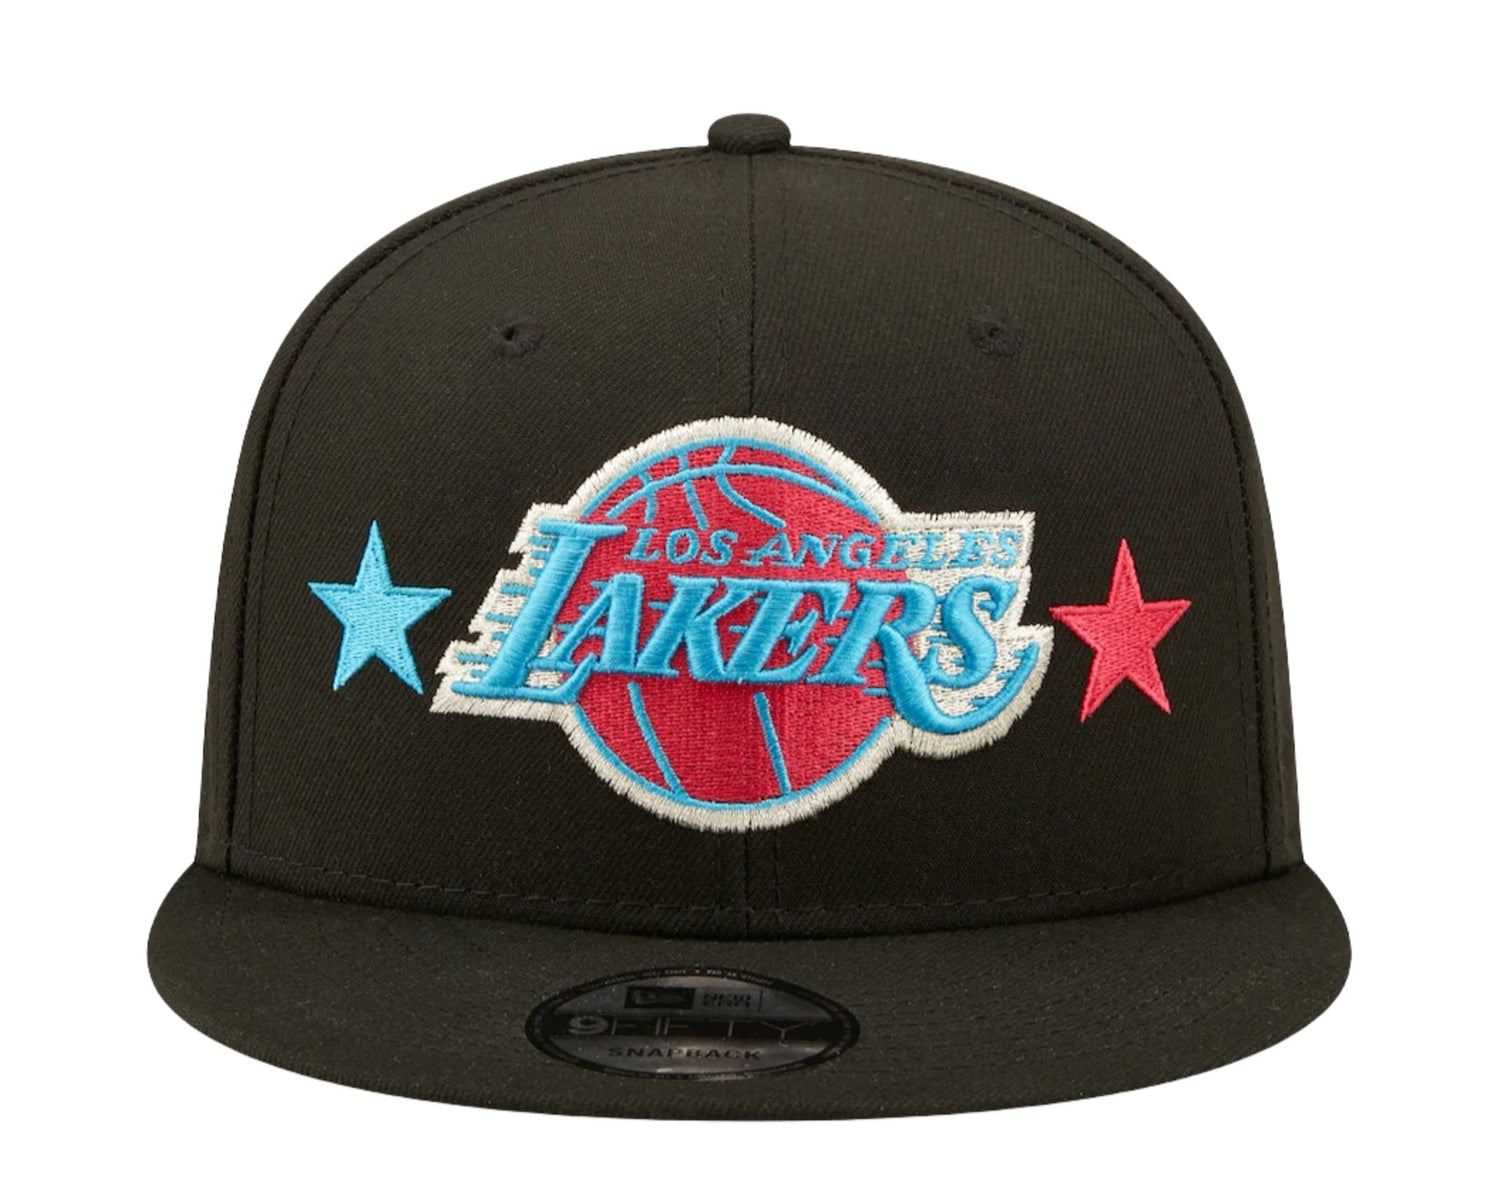 New Era 9Fifty NBA Los Angeles Lakers All Star Game Starry Snapback Hat